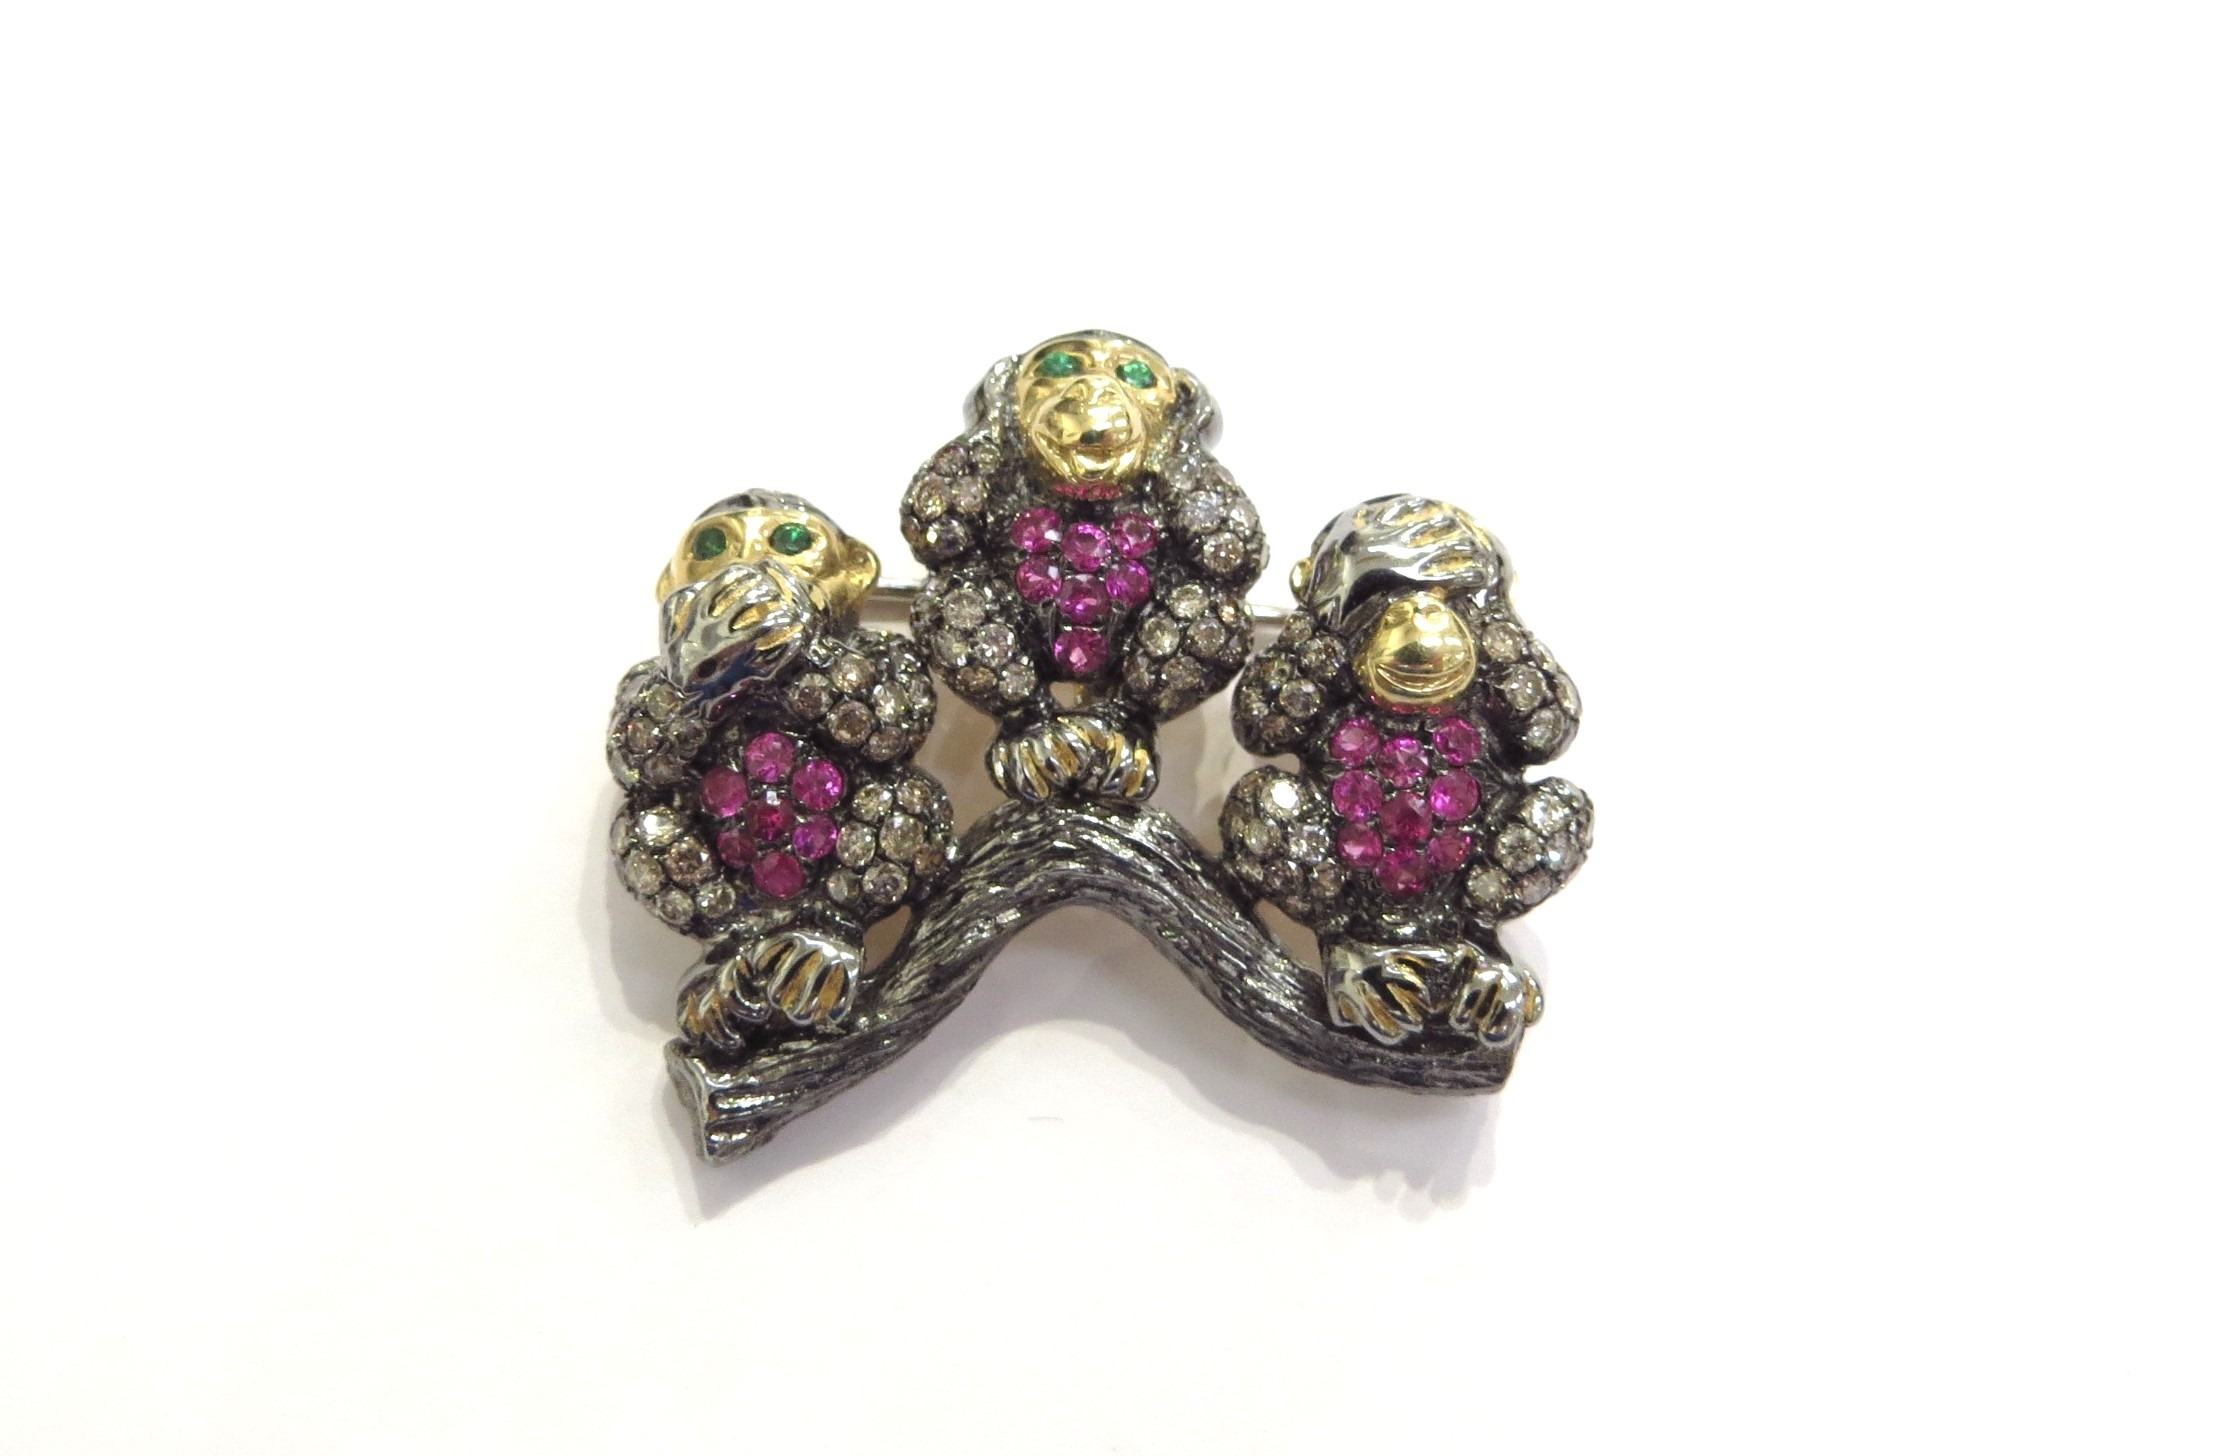 A gold brooch as three monkeys "See No Evil, Hear No Evil, Speak No Evil" encrusted with diamonds,